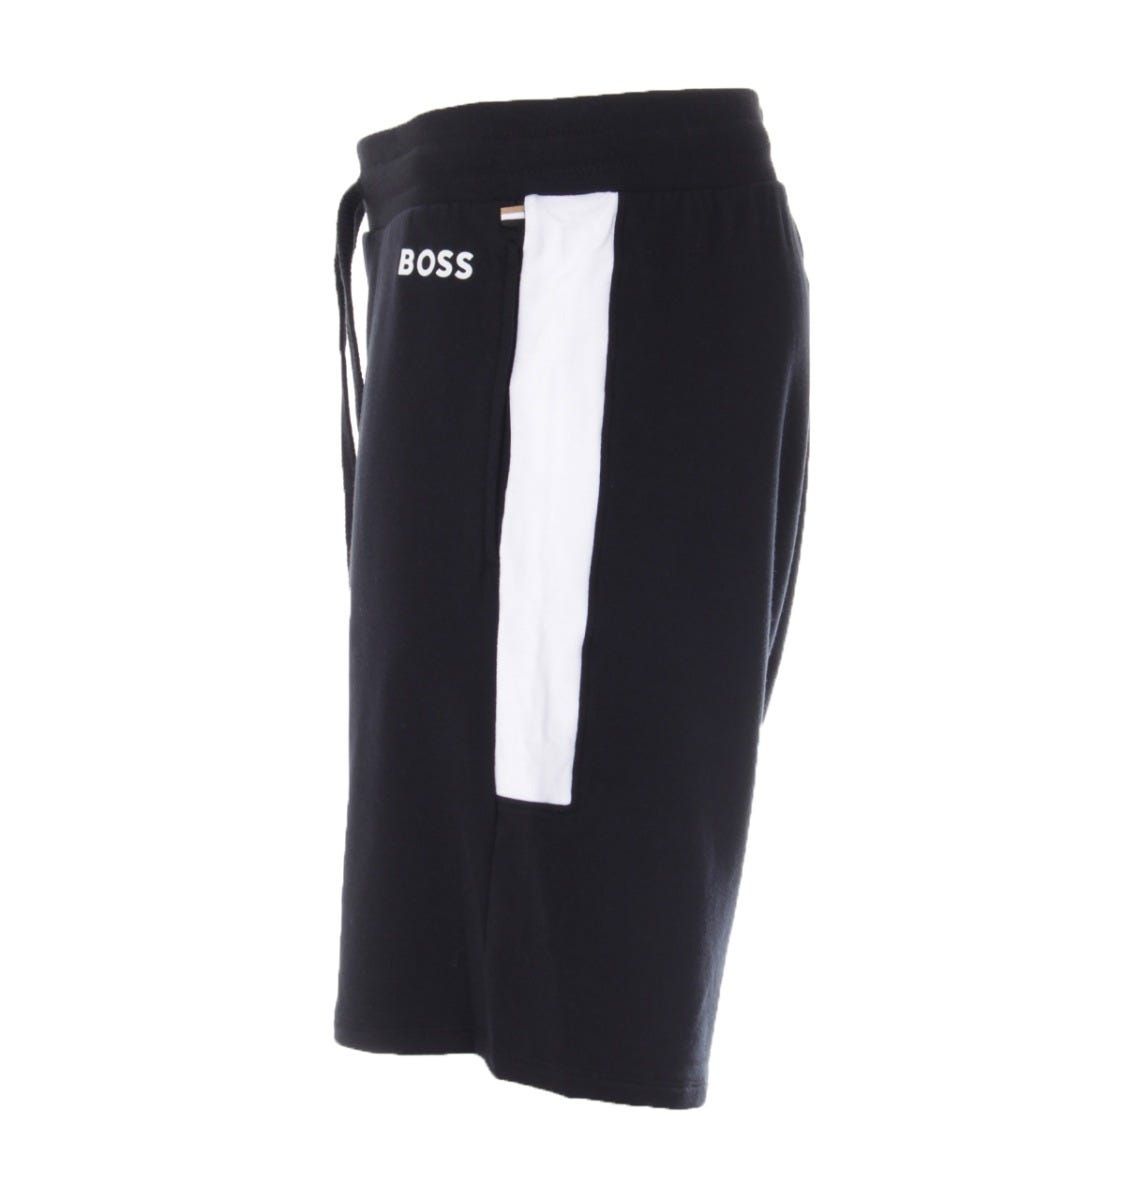 Add some everyday comfort to your wardrobe with these colour block shorts from BOSS. Crafted from a super soft and smooth stretch fabric composed of lyocell and cotton offering unmatched breathability and comfort. Featuring an elasticated drawstring waist, side seam pockets and colour block panels to the sides. Finished with the iconic BOSS logo contrast printed to the left leg.   TENCEL™ Lyocell - A fiber extracted from natural raw wood material and sourced from responsibly managed forests, weaved with cotton to improve breathability. softness and durability.Regular Fit, Stretch TENCEL™ Lyocell & Cotton Blend, Elasticated Drawstring Waist, Twin Side Seam Pockets, Colour Block Panels, BOSS Branding. Style & FitRegular Fit, Fits True to Size. Composition & Care: 83% Lyocell, 12% Cotton, 5% Elastane, Machine Wash.